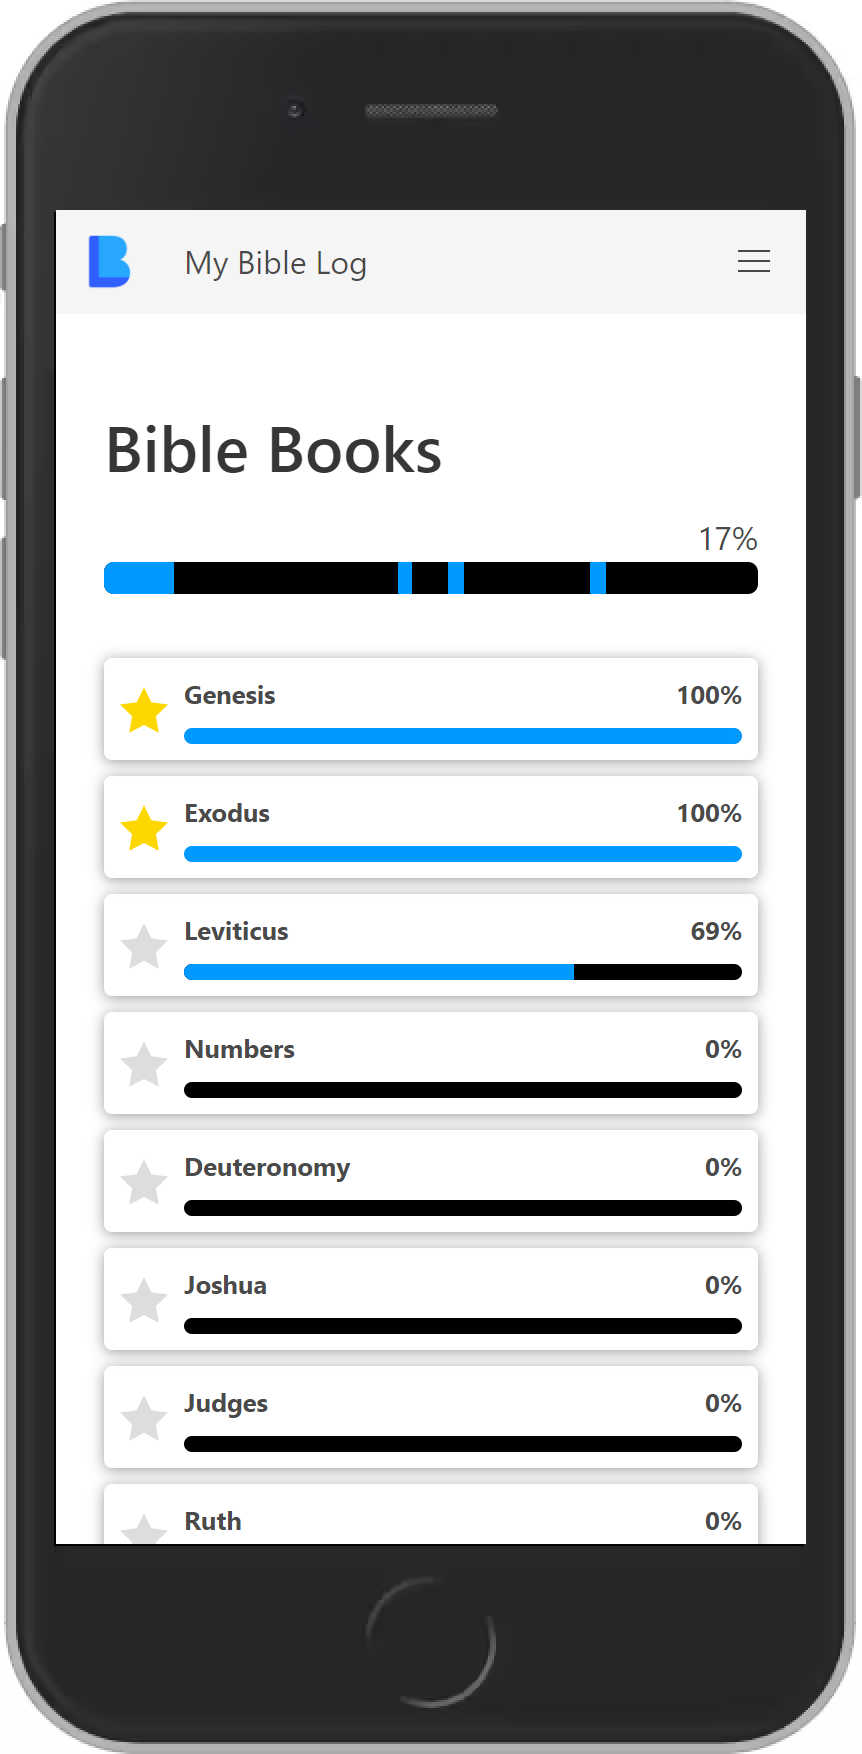 My Bible Log showing reading progress for the whole Bible